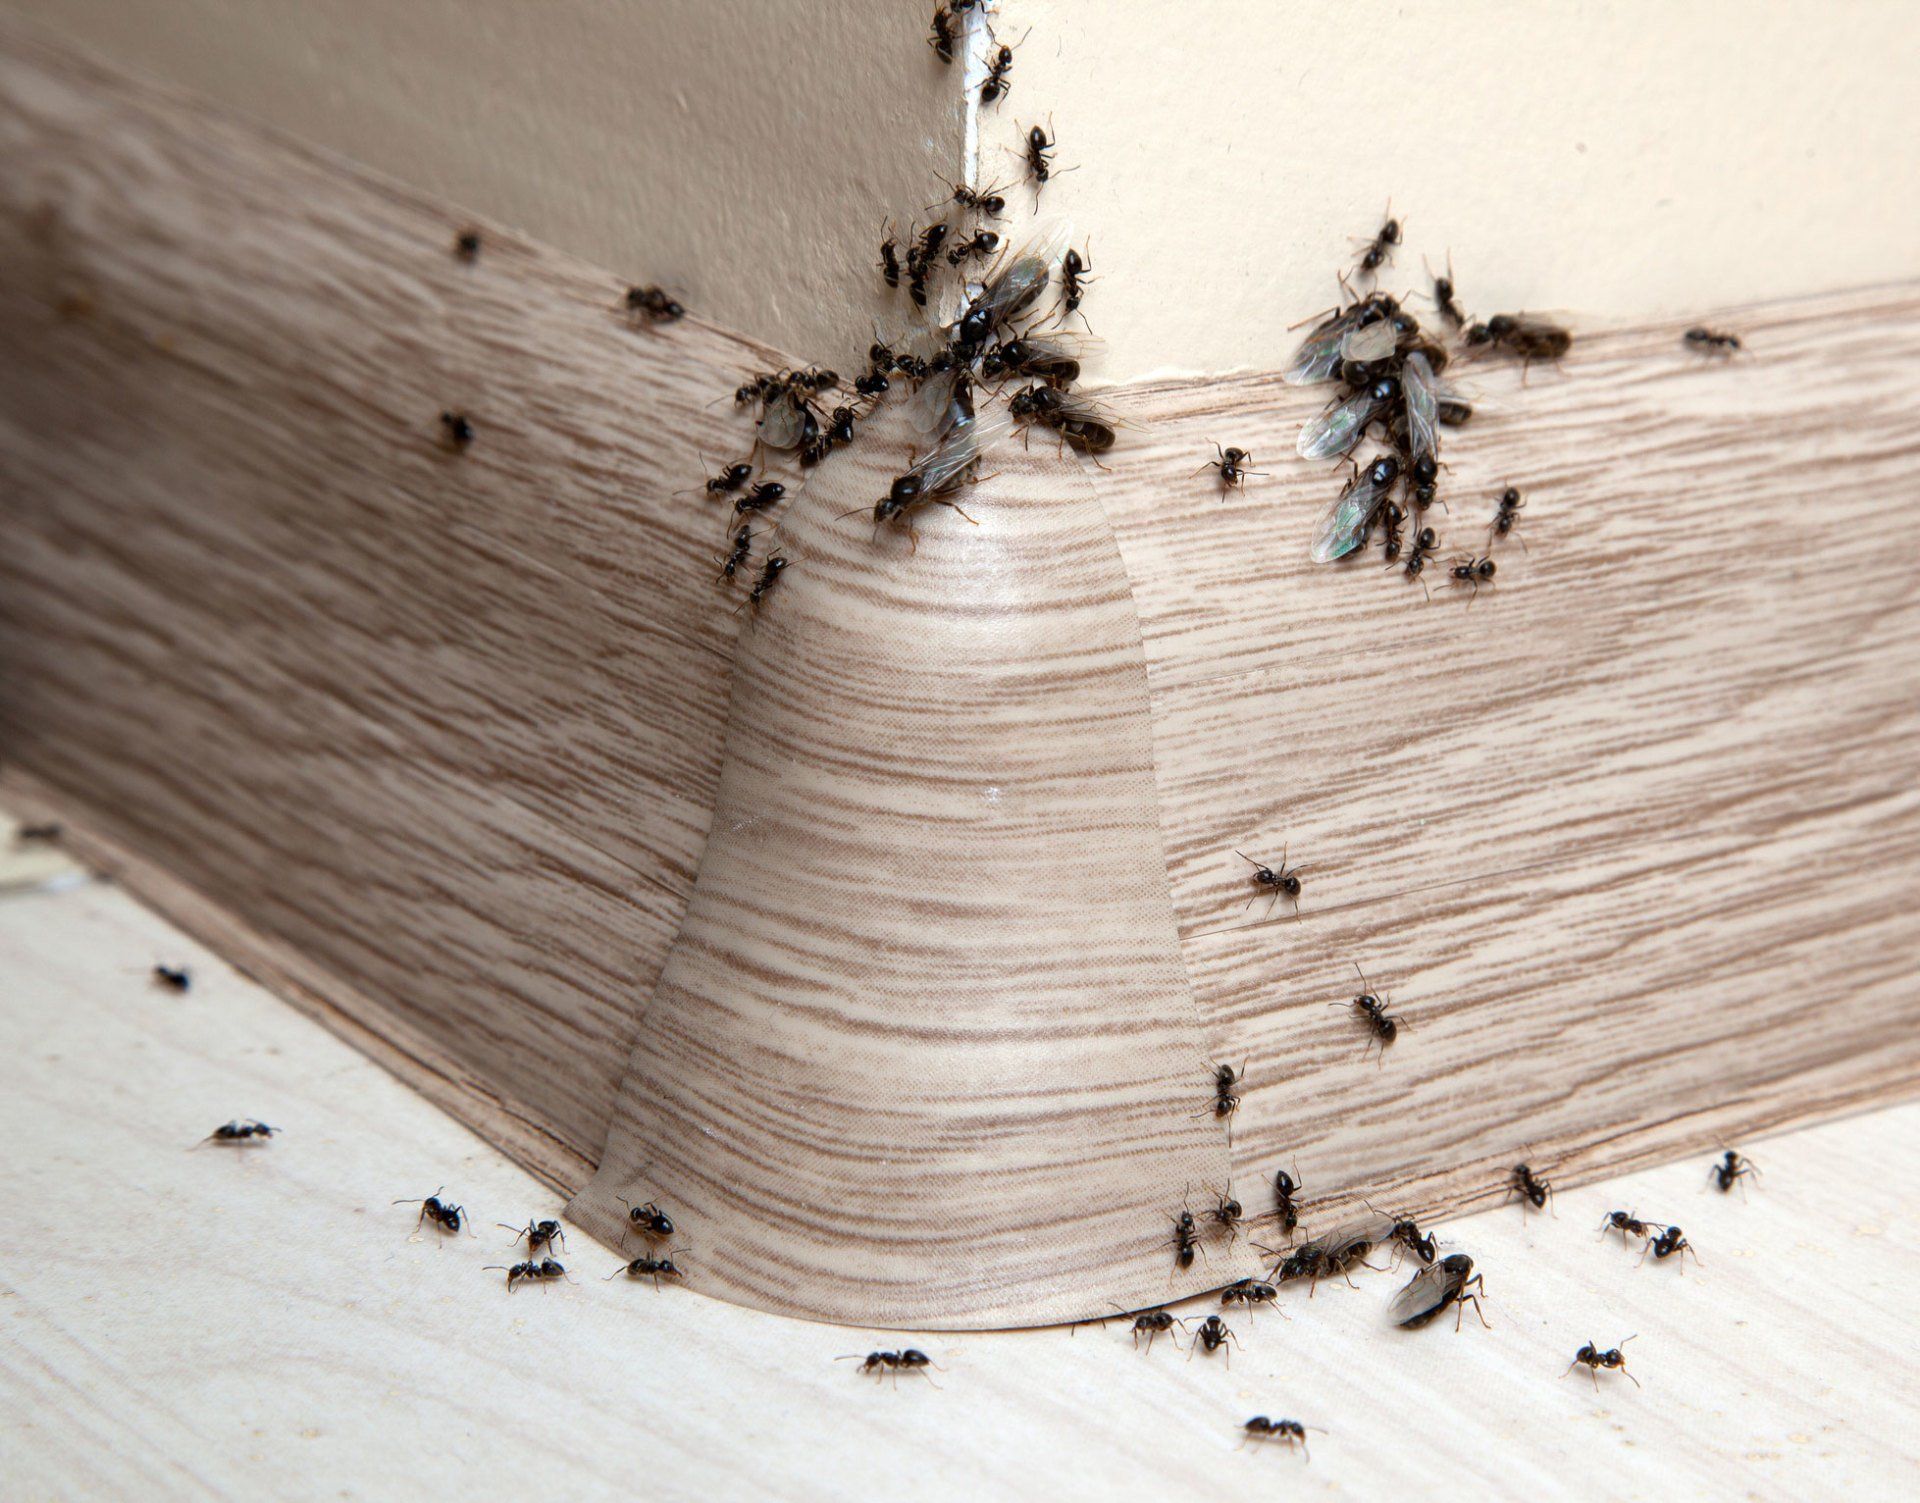 Ants — Group of Ants in the Wall Inside the House in Point Harbor, NC